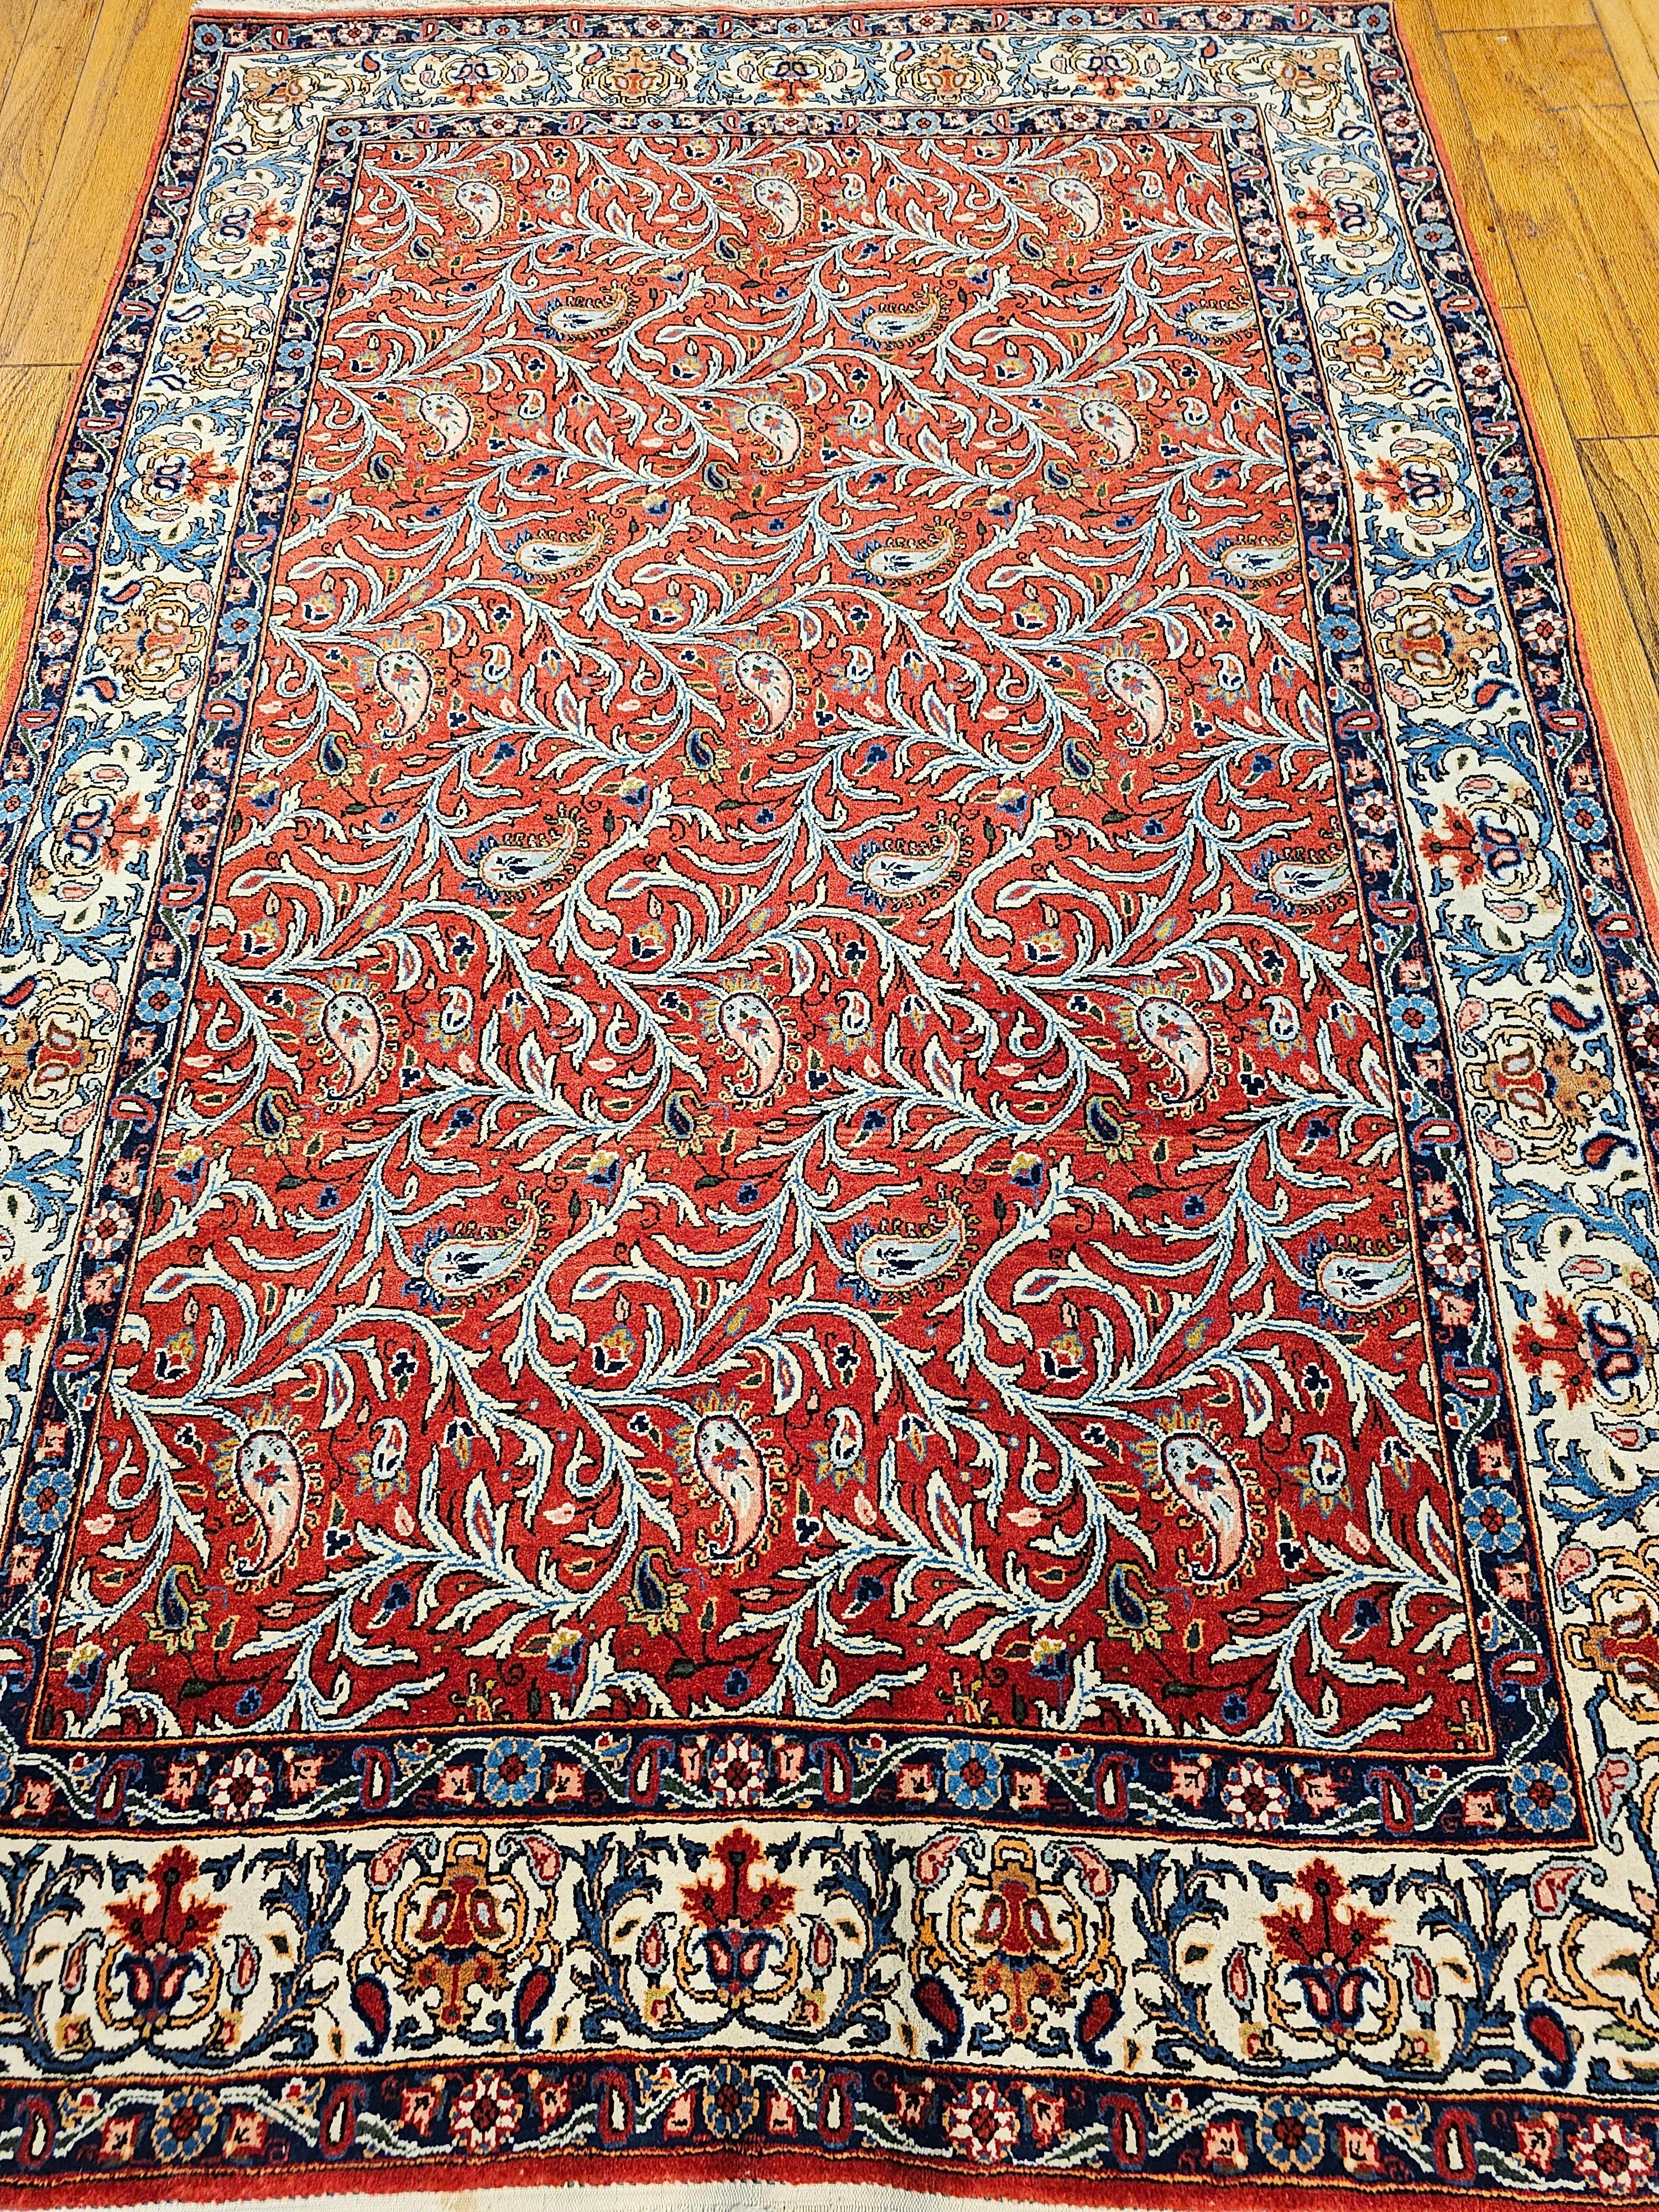 A vintage Persian Qum in an all over paisleys and meandering vines pattern set on a rich red background from the second quarter of the 1900s.  The rug has an allover design of wavering vines and paisley forms set in a rich red color field.   The